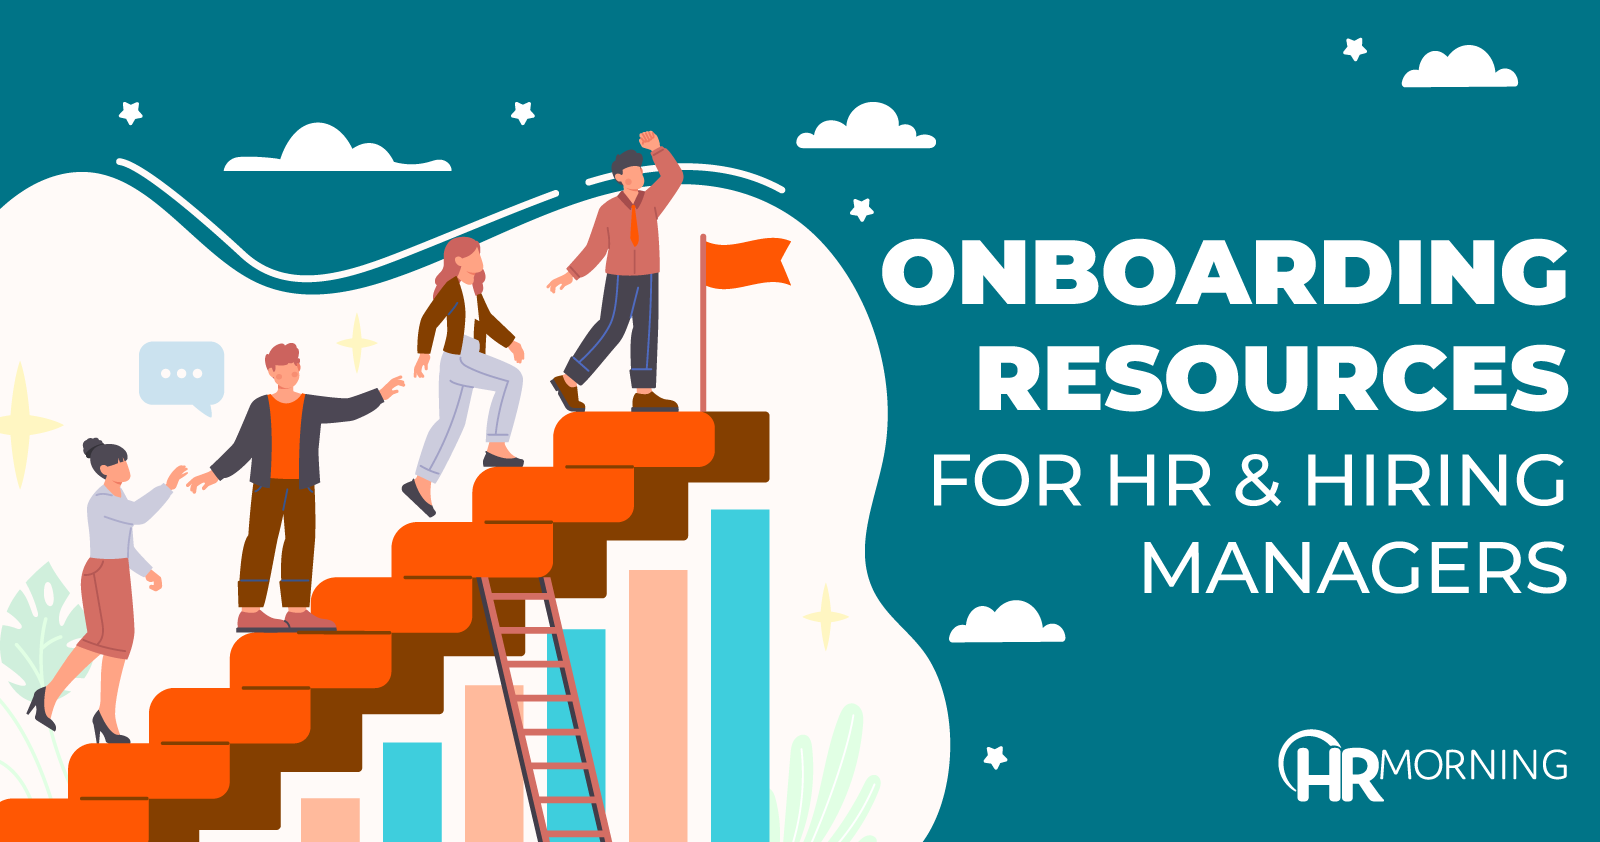 Onboarding Resources for HR & Hiring Managers